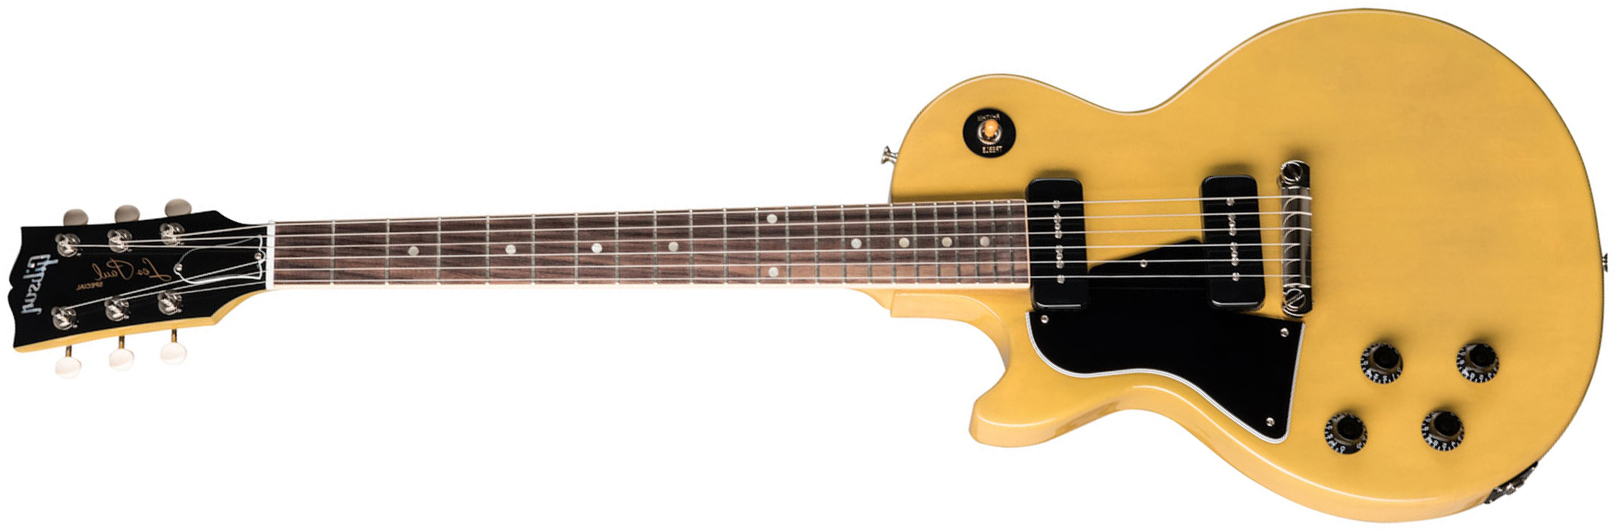 Gibson Les Paul Special Lh Original Gaucher 2p90 Ht Rw - Tv Yellow - Left-handed electric guitar - Main picture